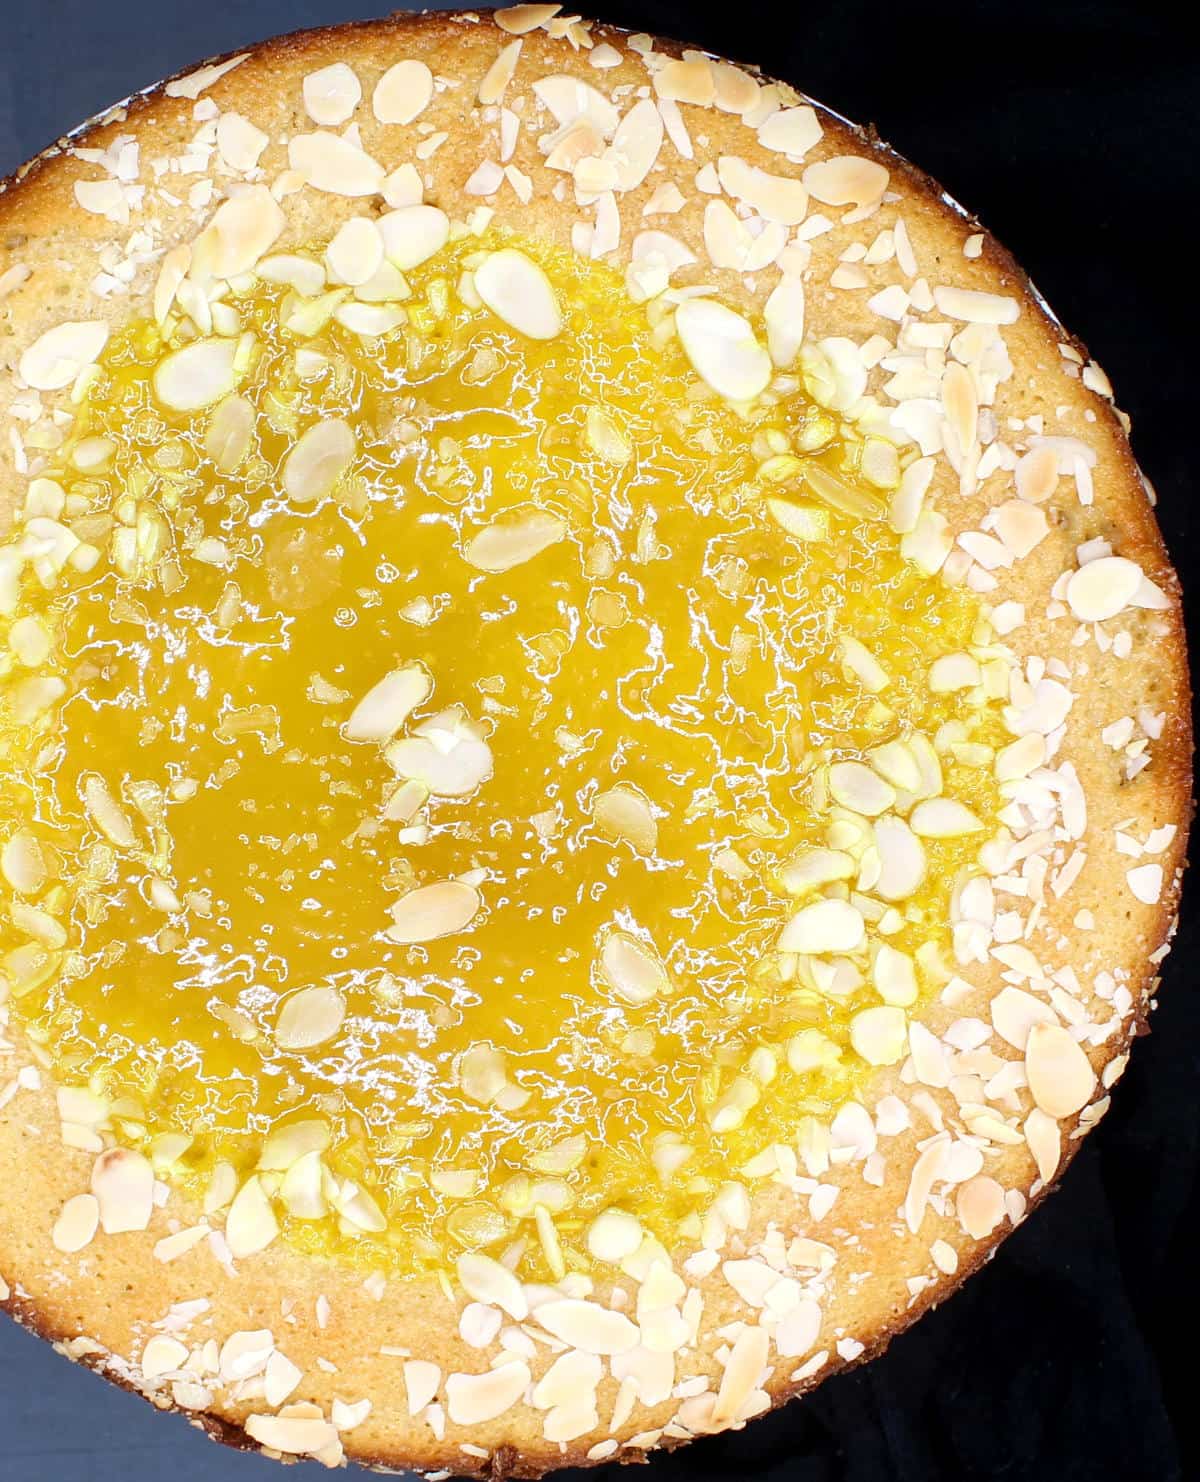 An overhead photo of the vegan lemon cake with lemon curd topping and sliced almonds.